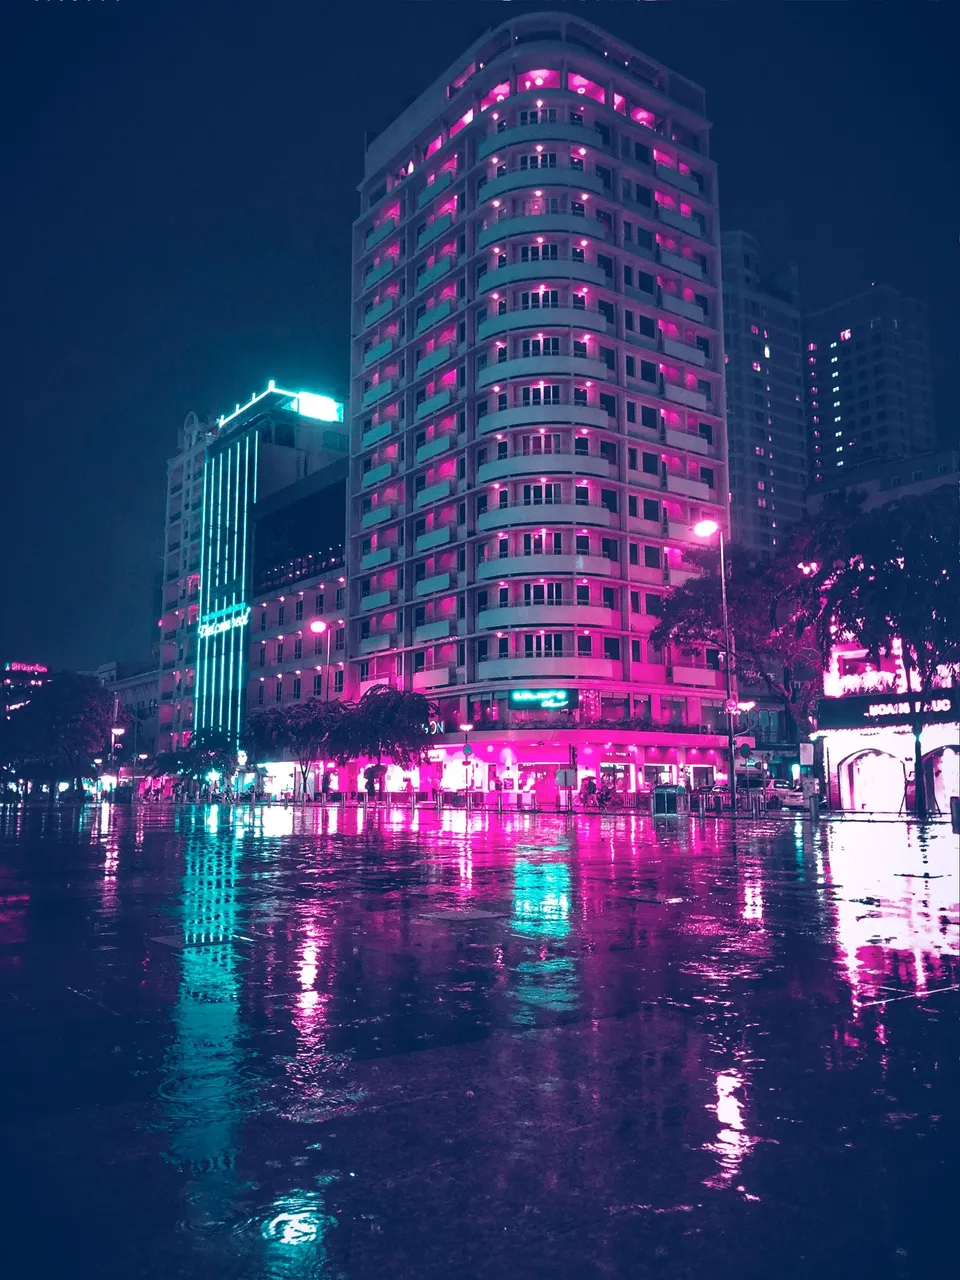 Vietnam is filled with Vaporwave and Cyberpunk Aesthetics